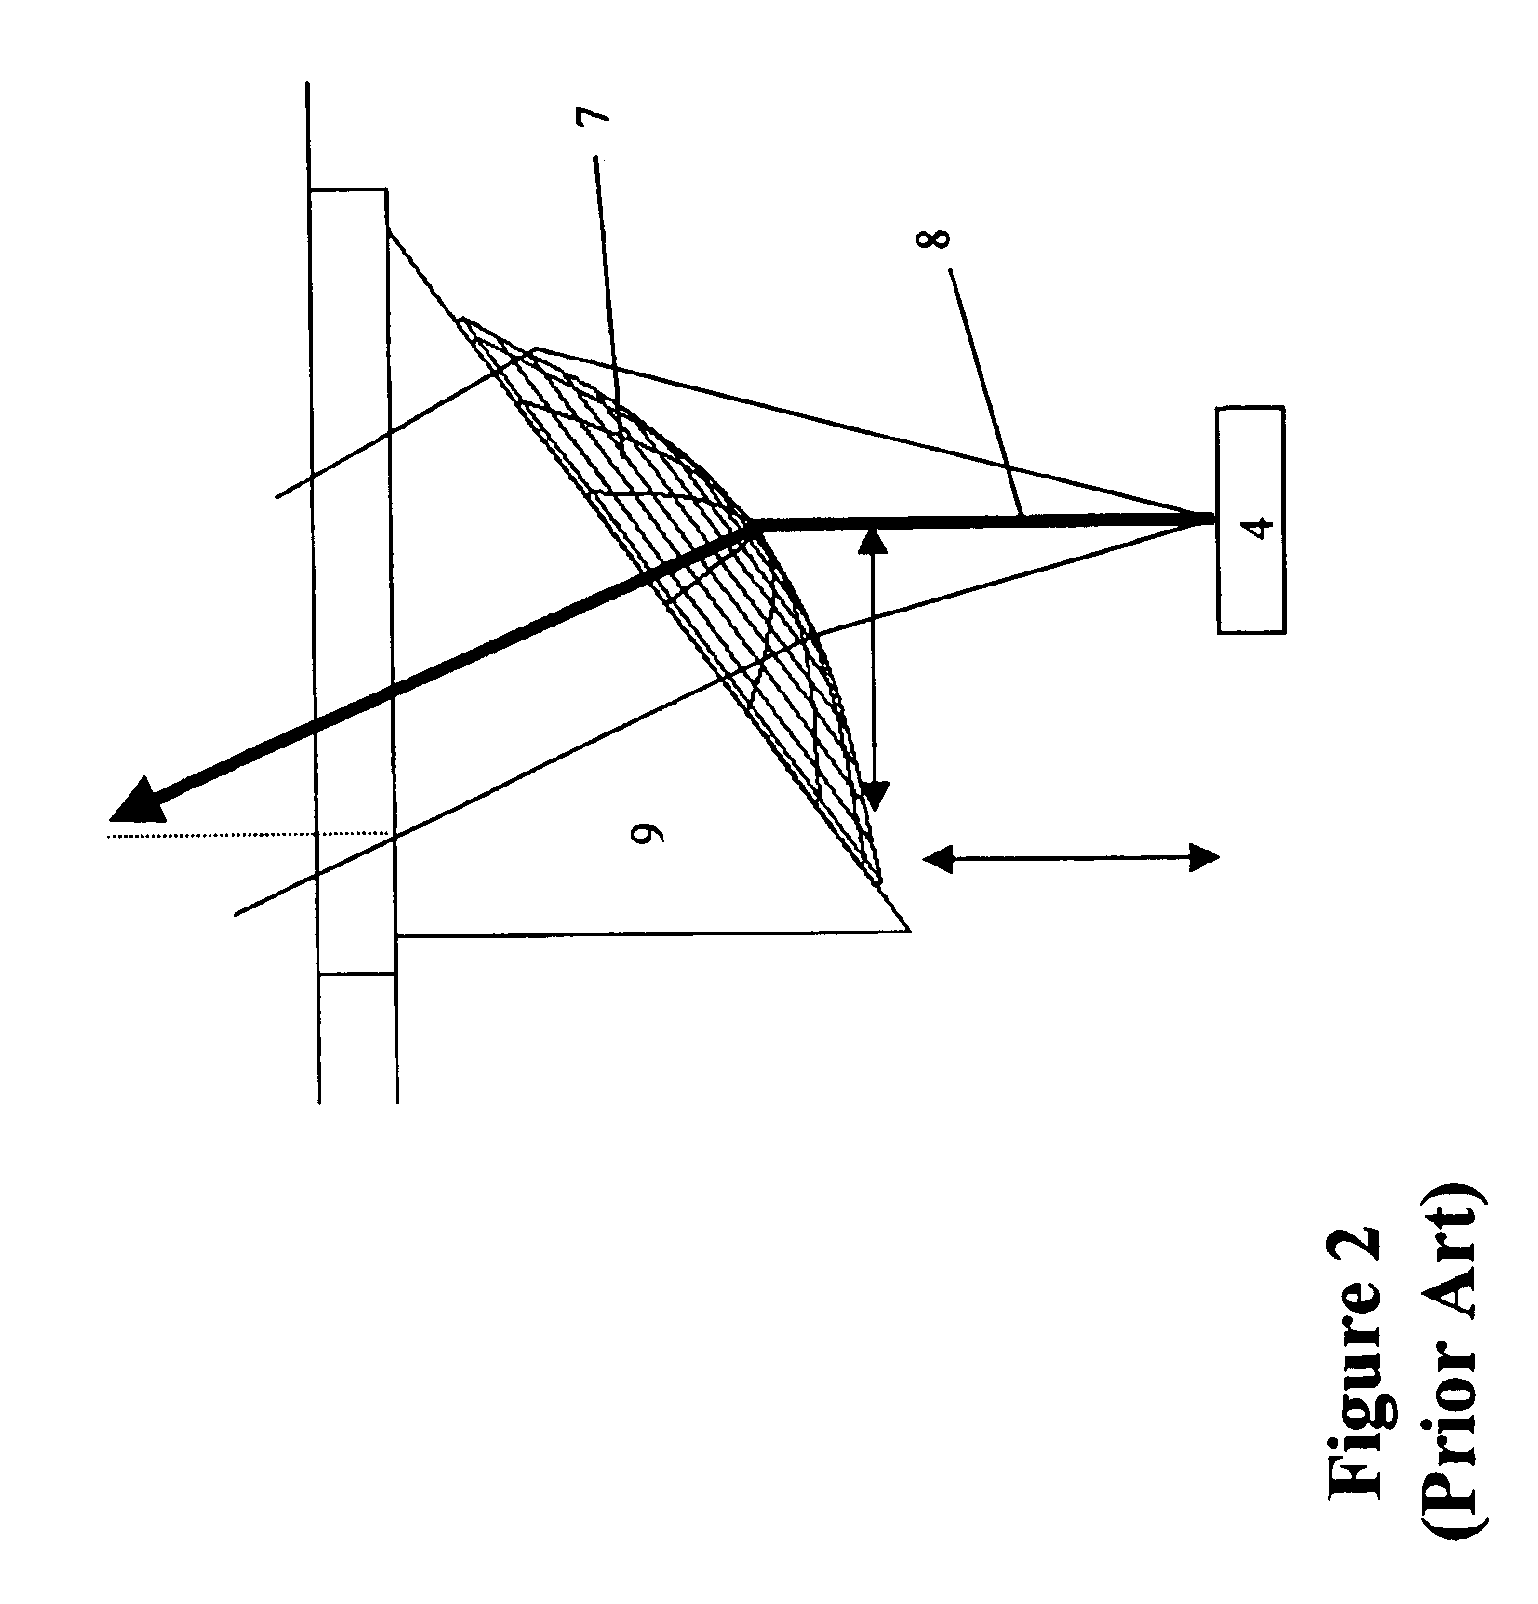 System and method for collimating and redirecting beams in a fiber optic system